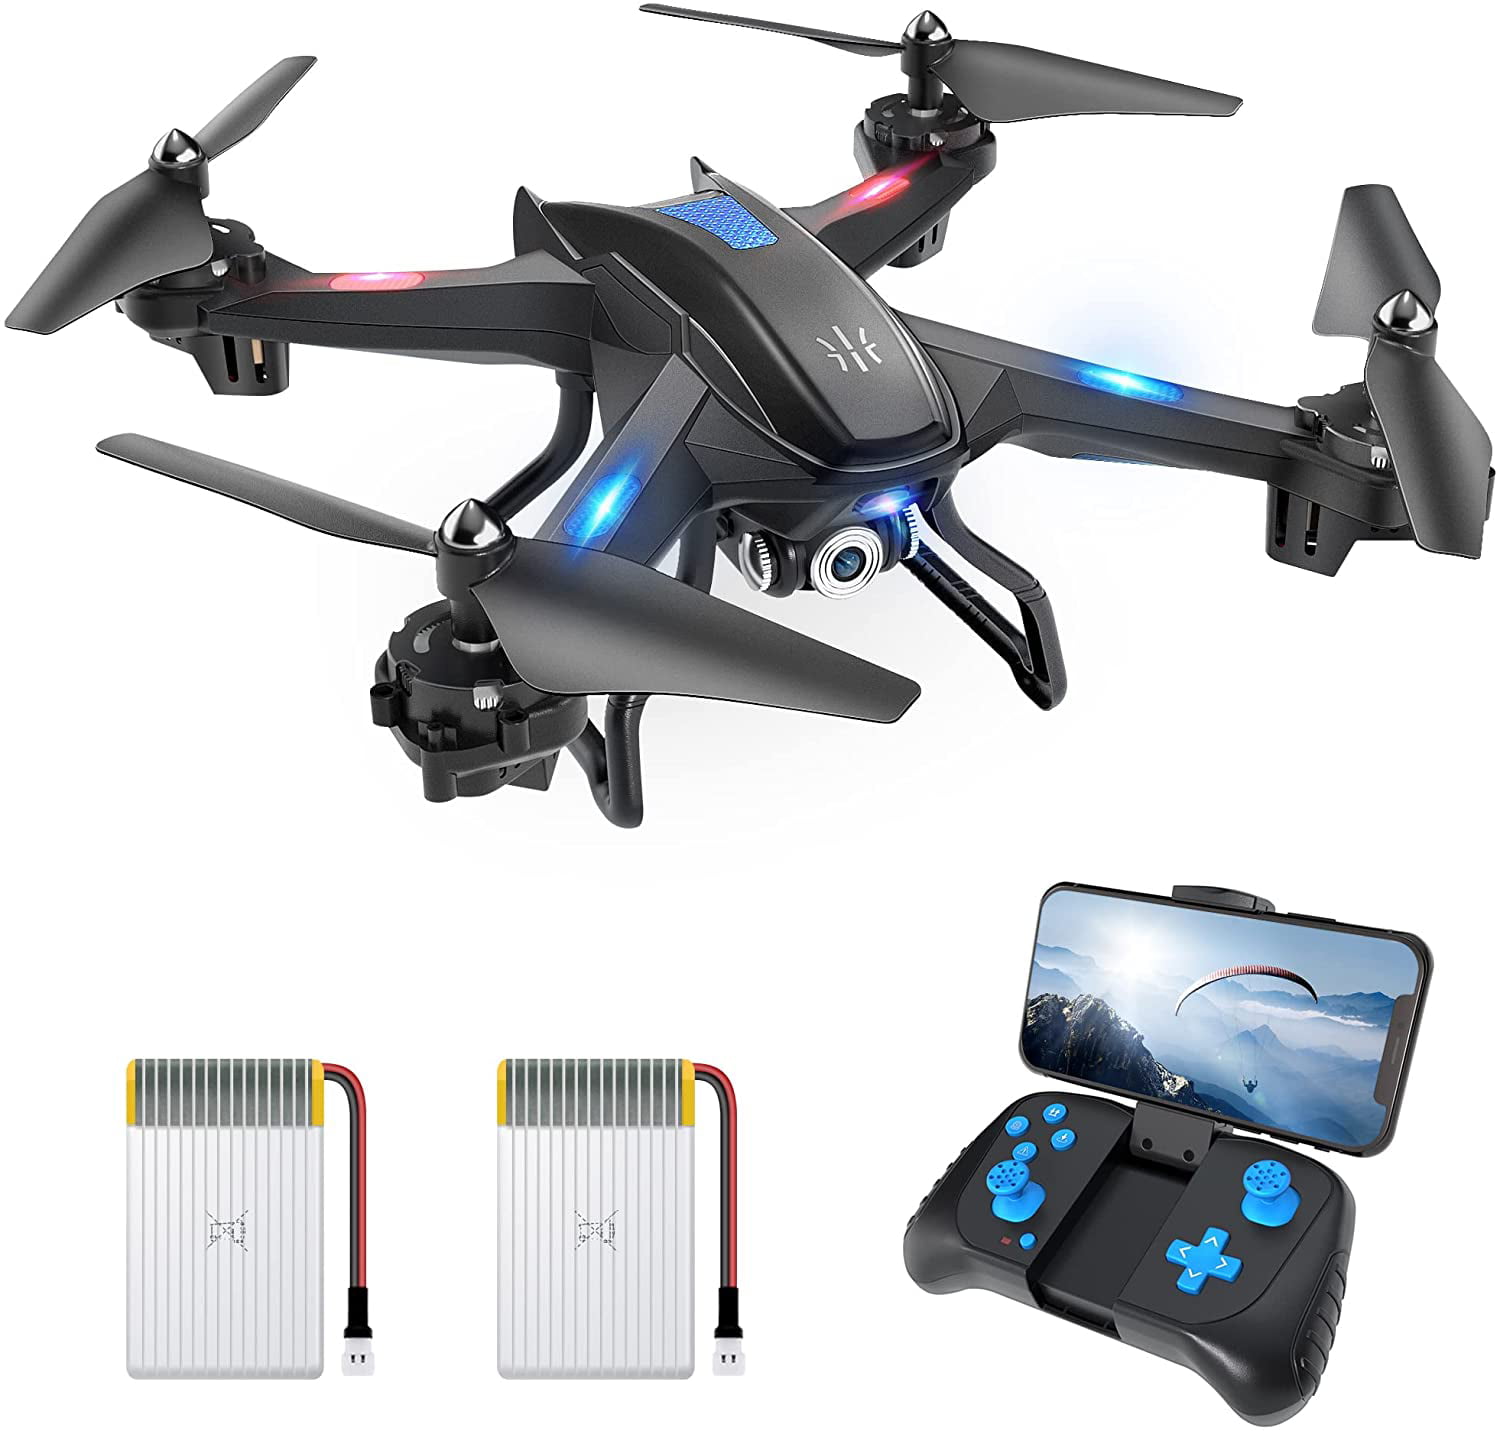 SG700 2.4Ghz 4CH 360° Hold WiFi Dual Camera 2.0MP Optical Flow RC Drone US STOCK 